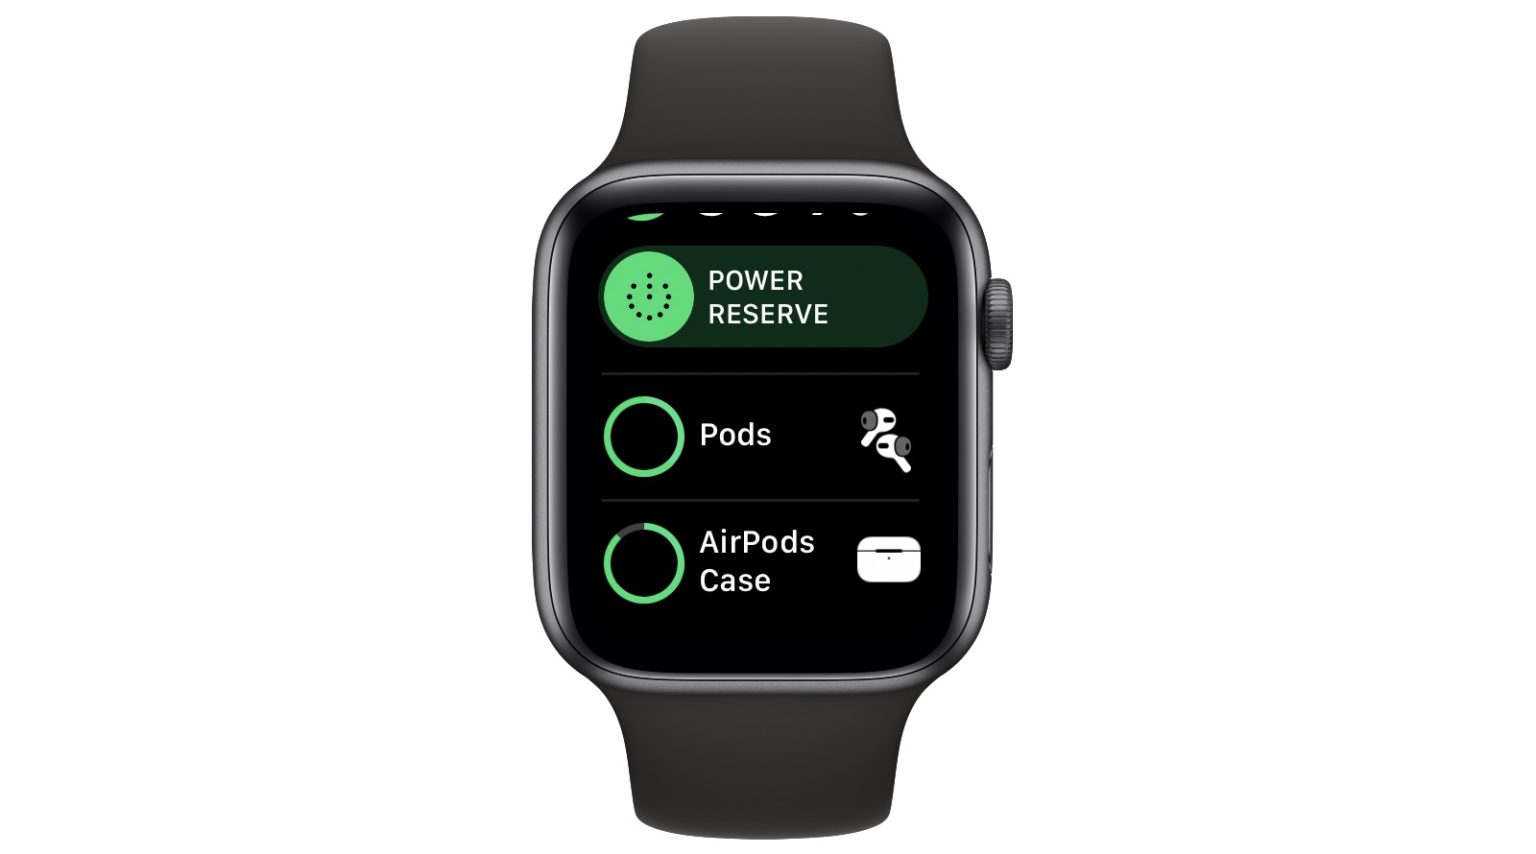 Apple Watch AirPods battery